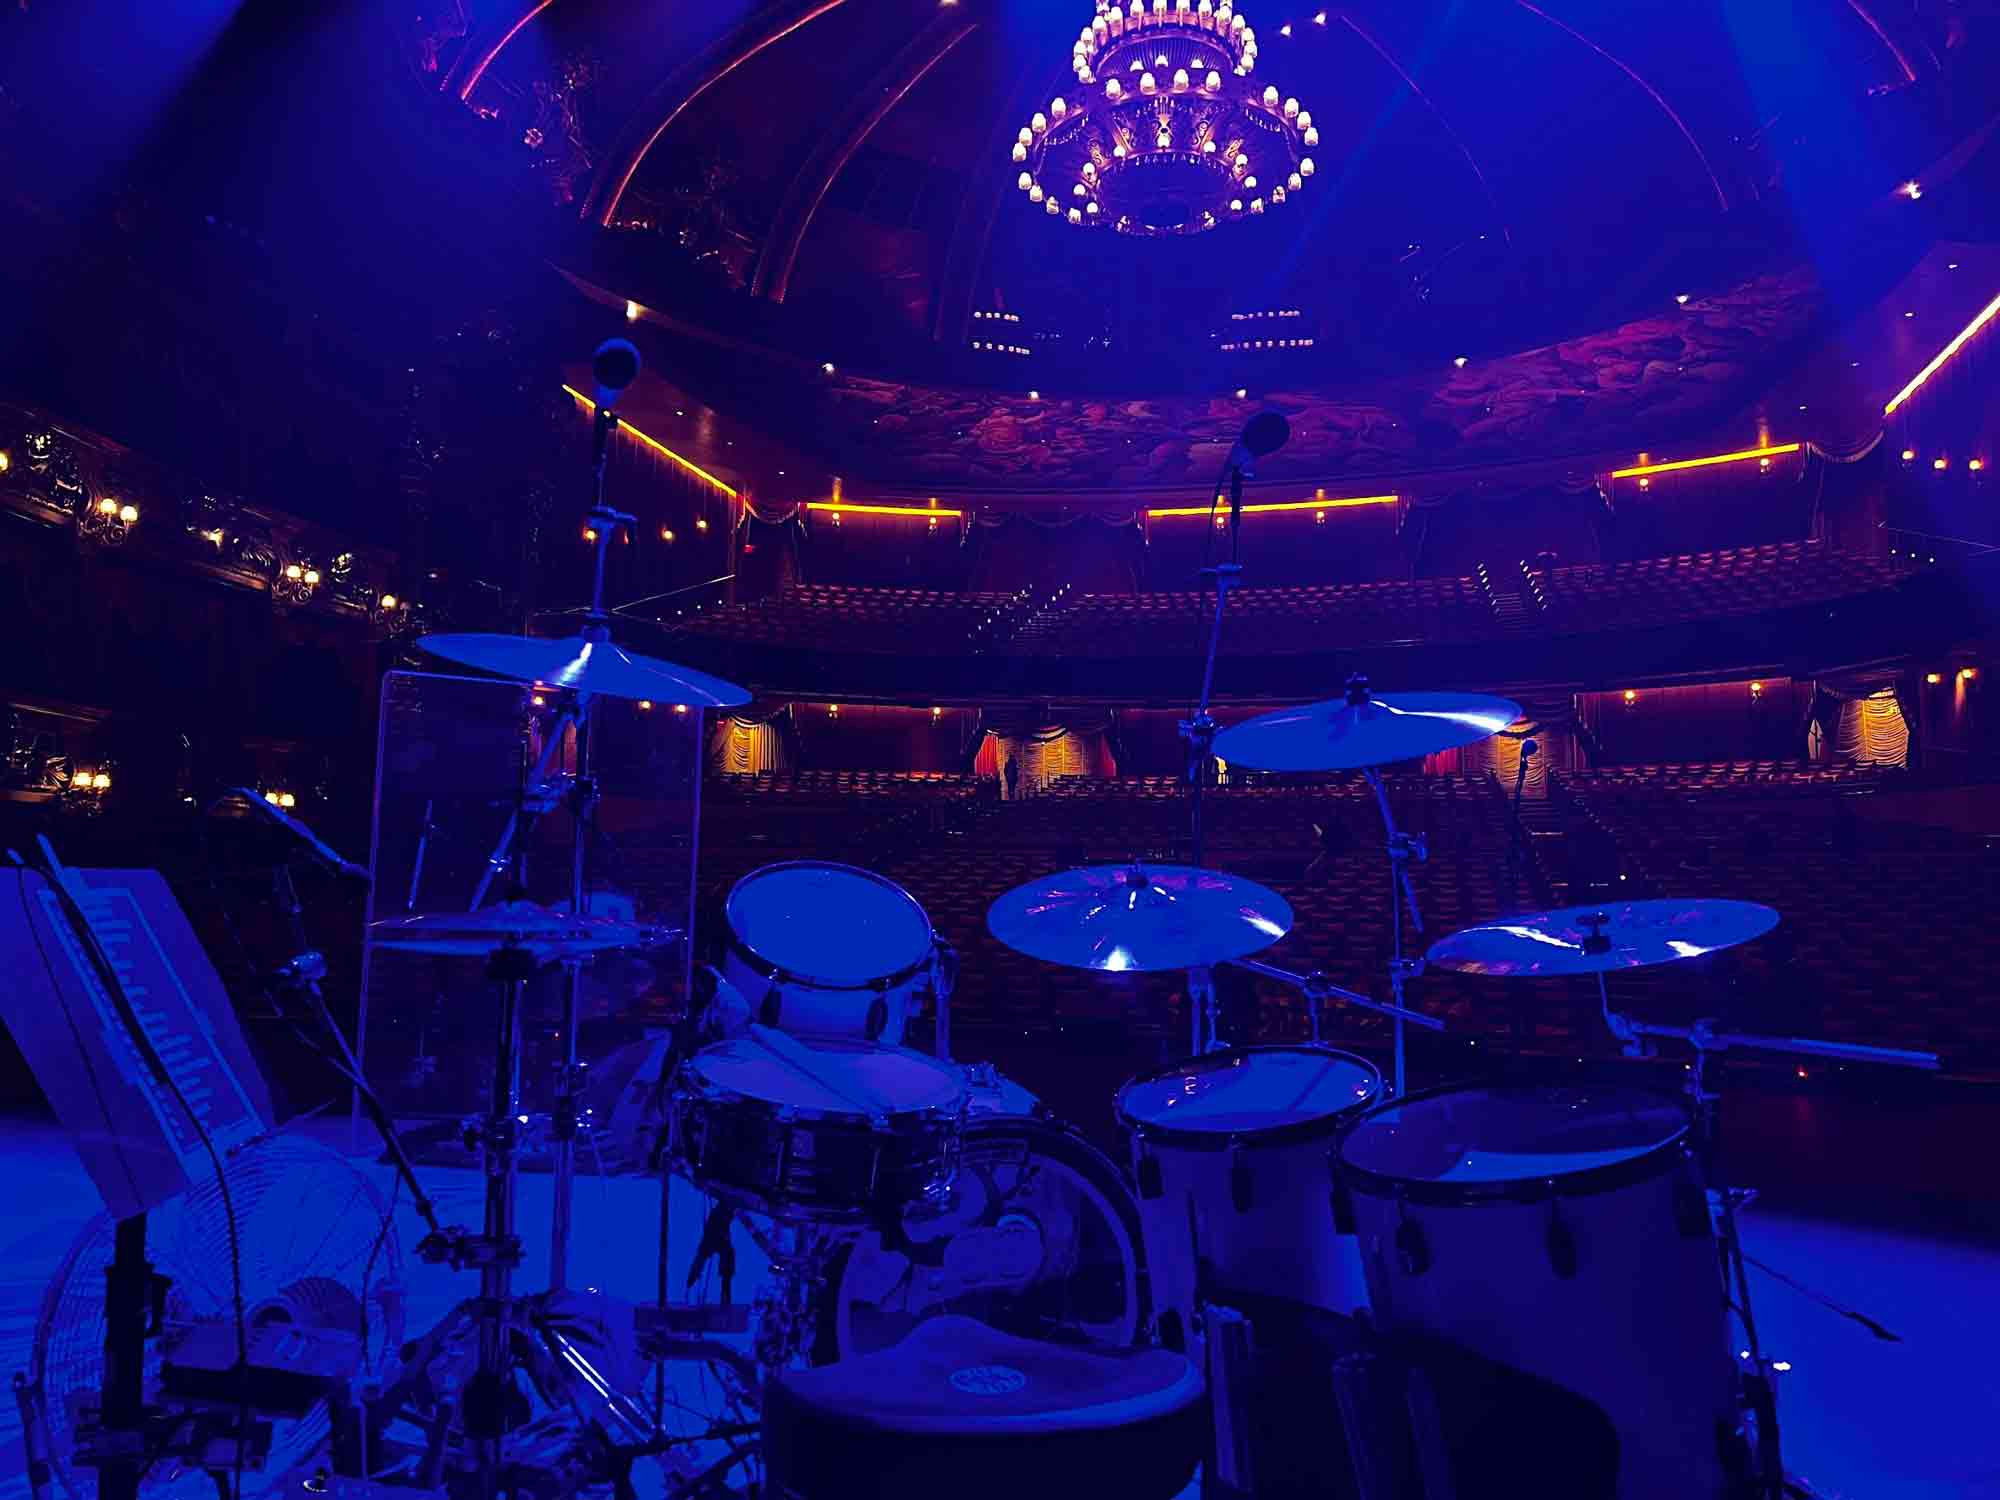 Steve Miller Band - Drums - Before the show at the Venetian